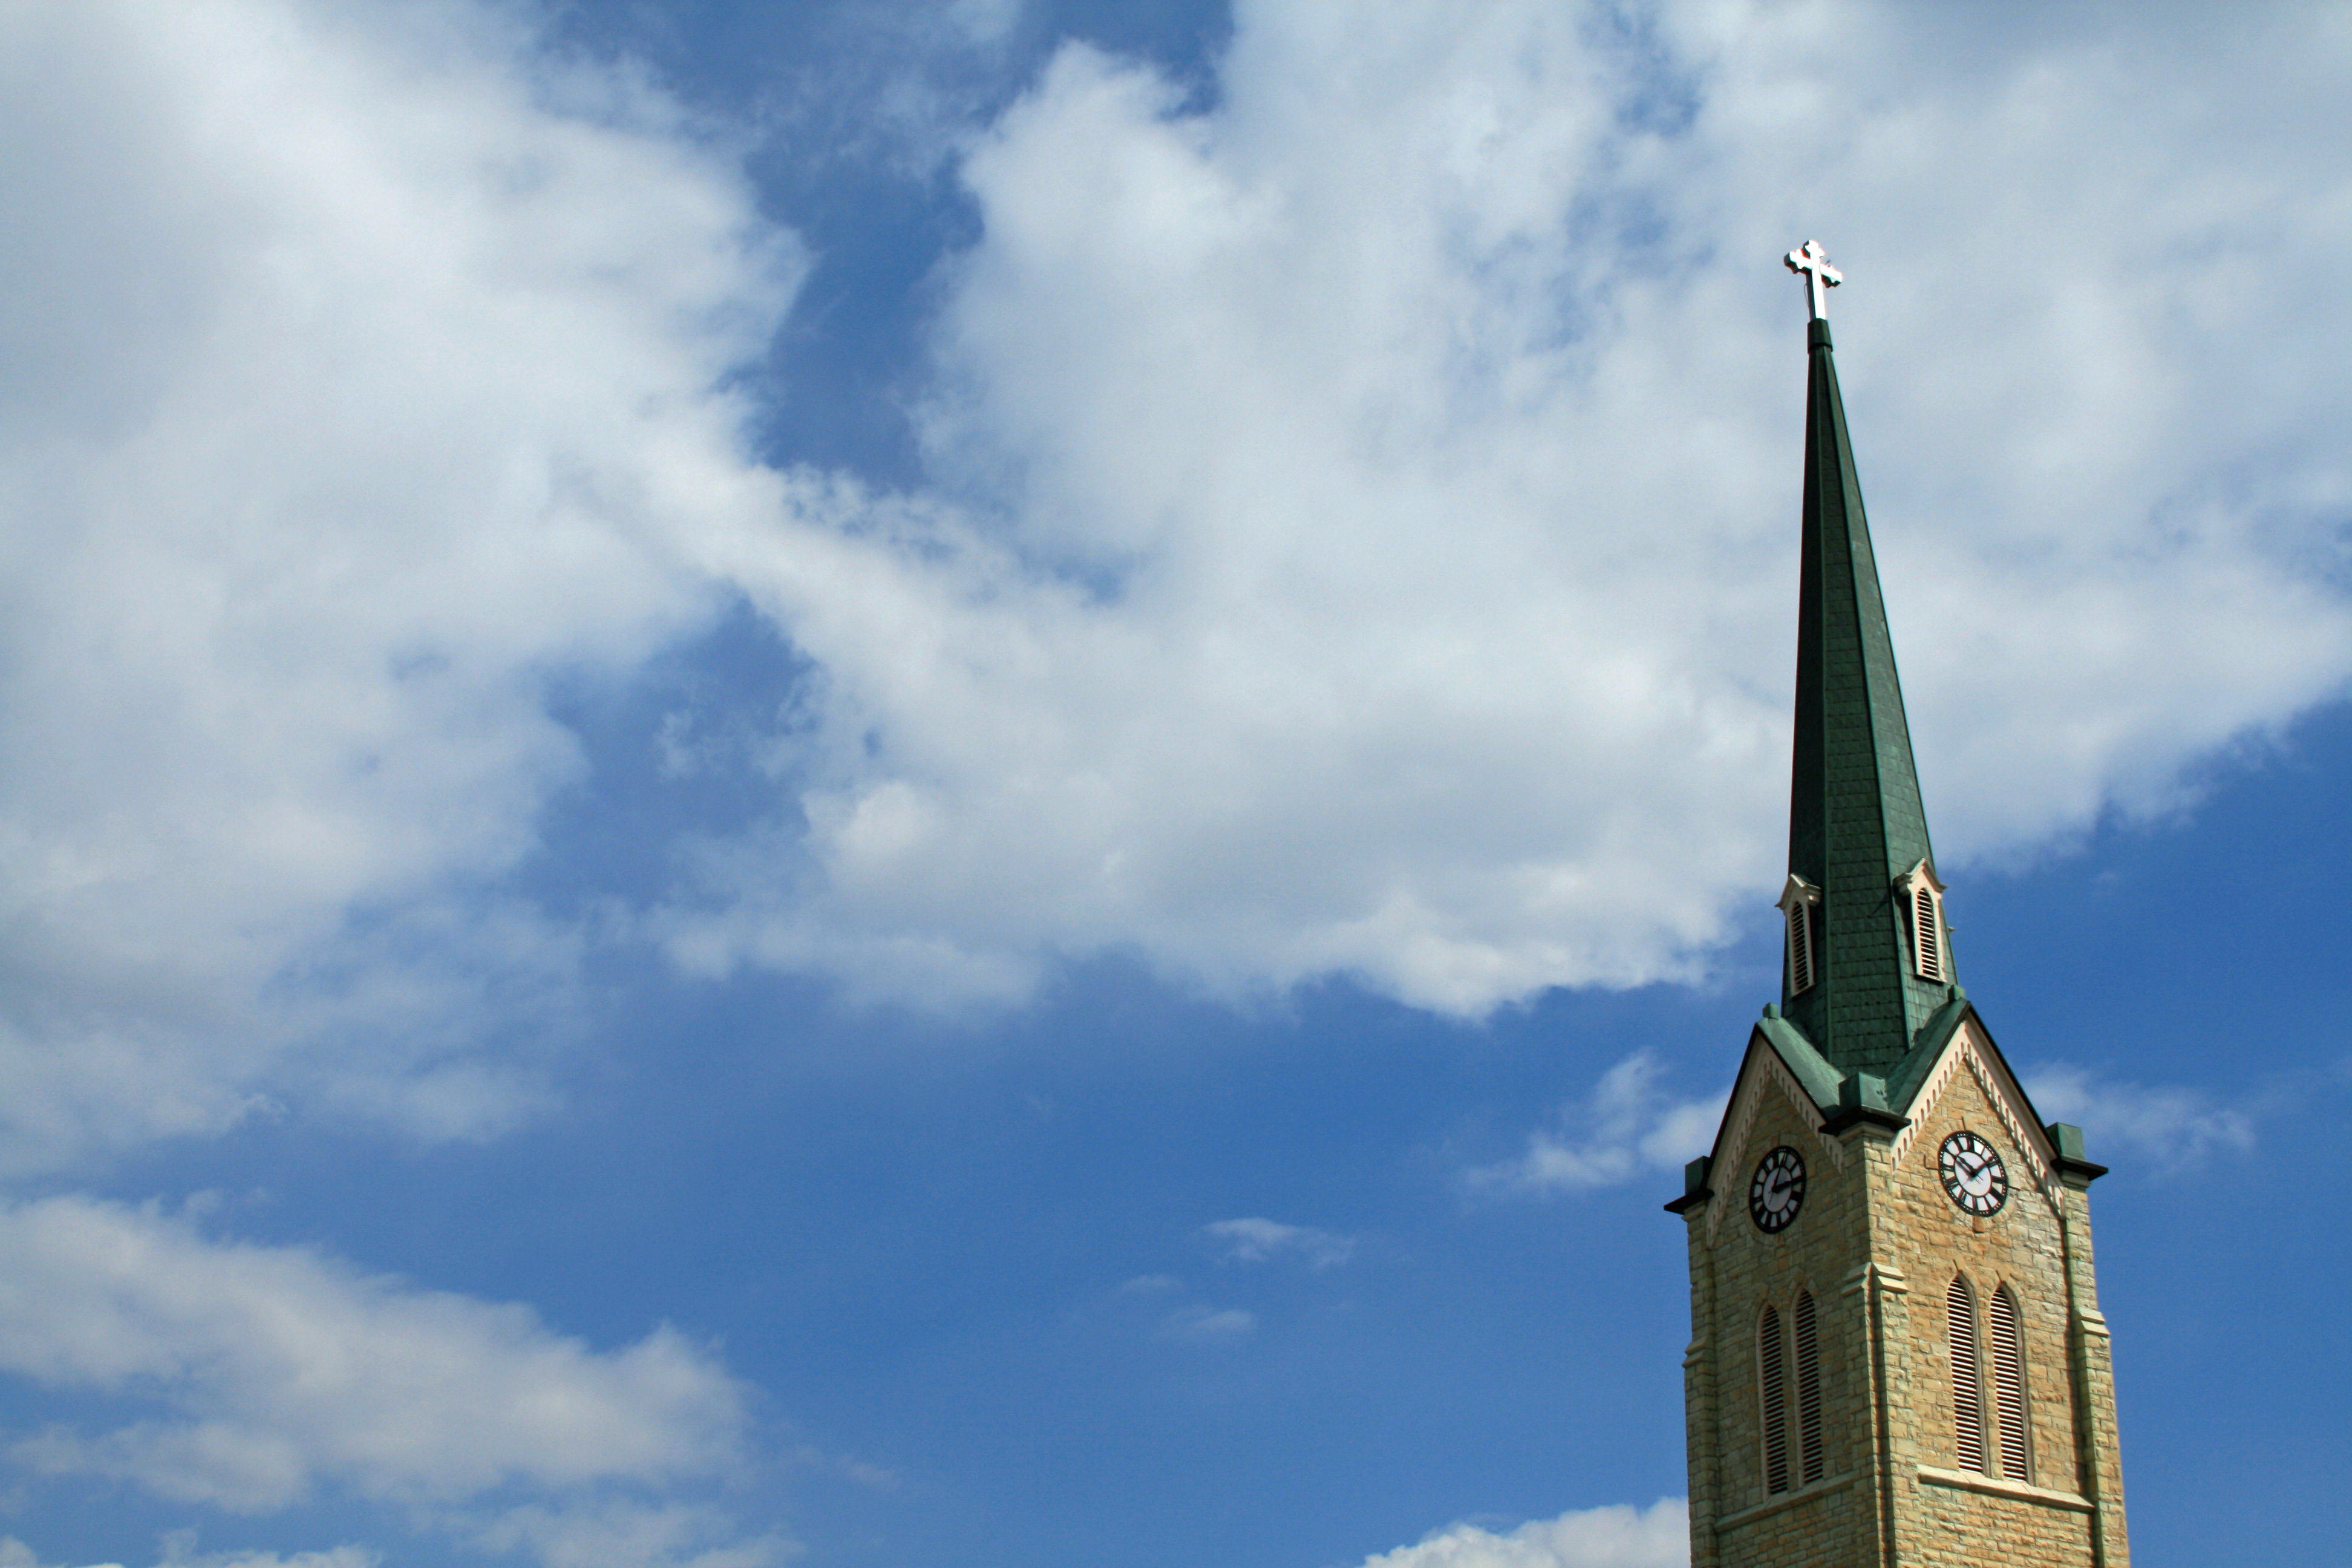 File:Church steeple with clouds.JPG - Wikipedia